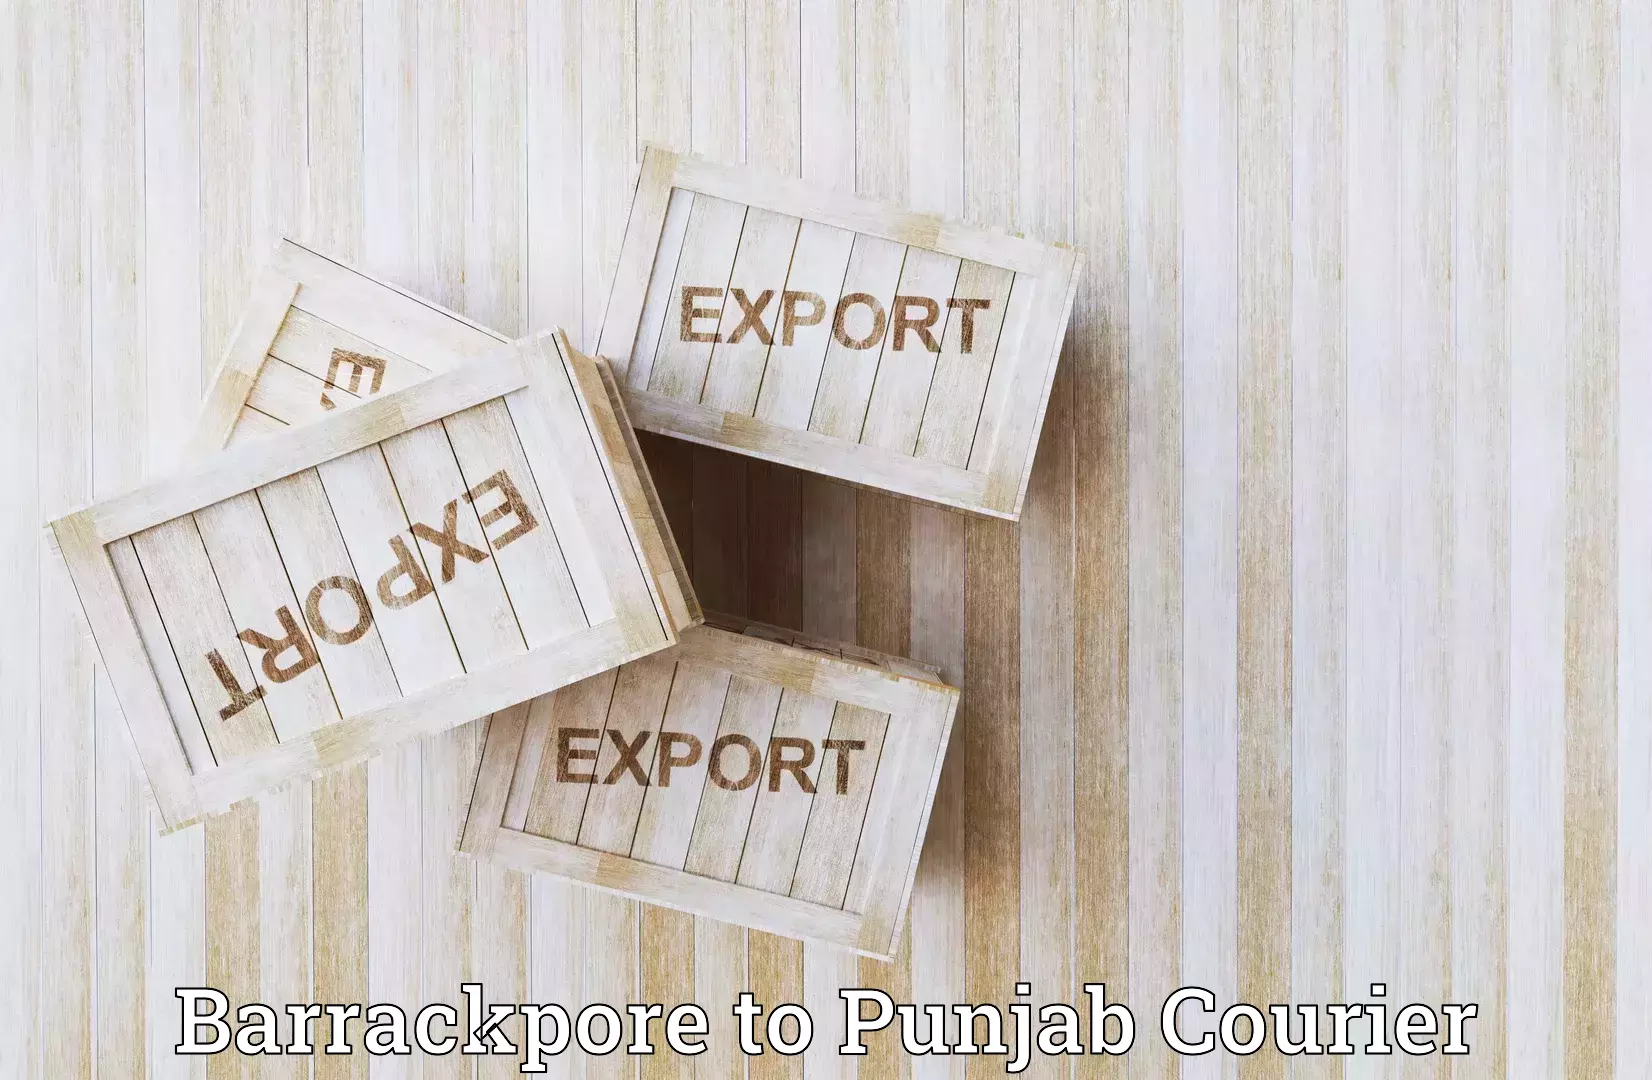 Personalized courier experiences in Barrackpore to Faridkot